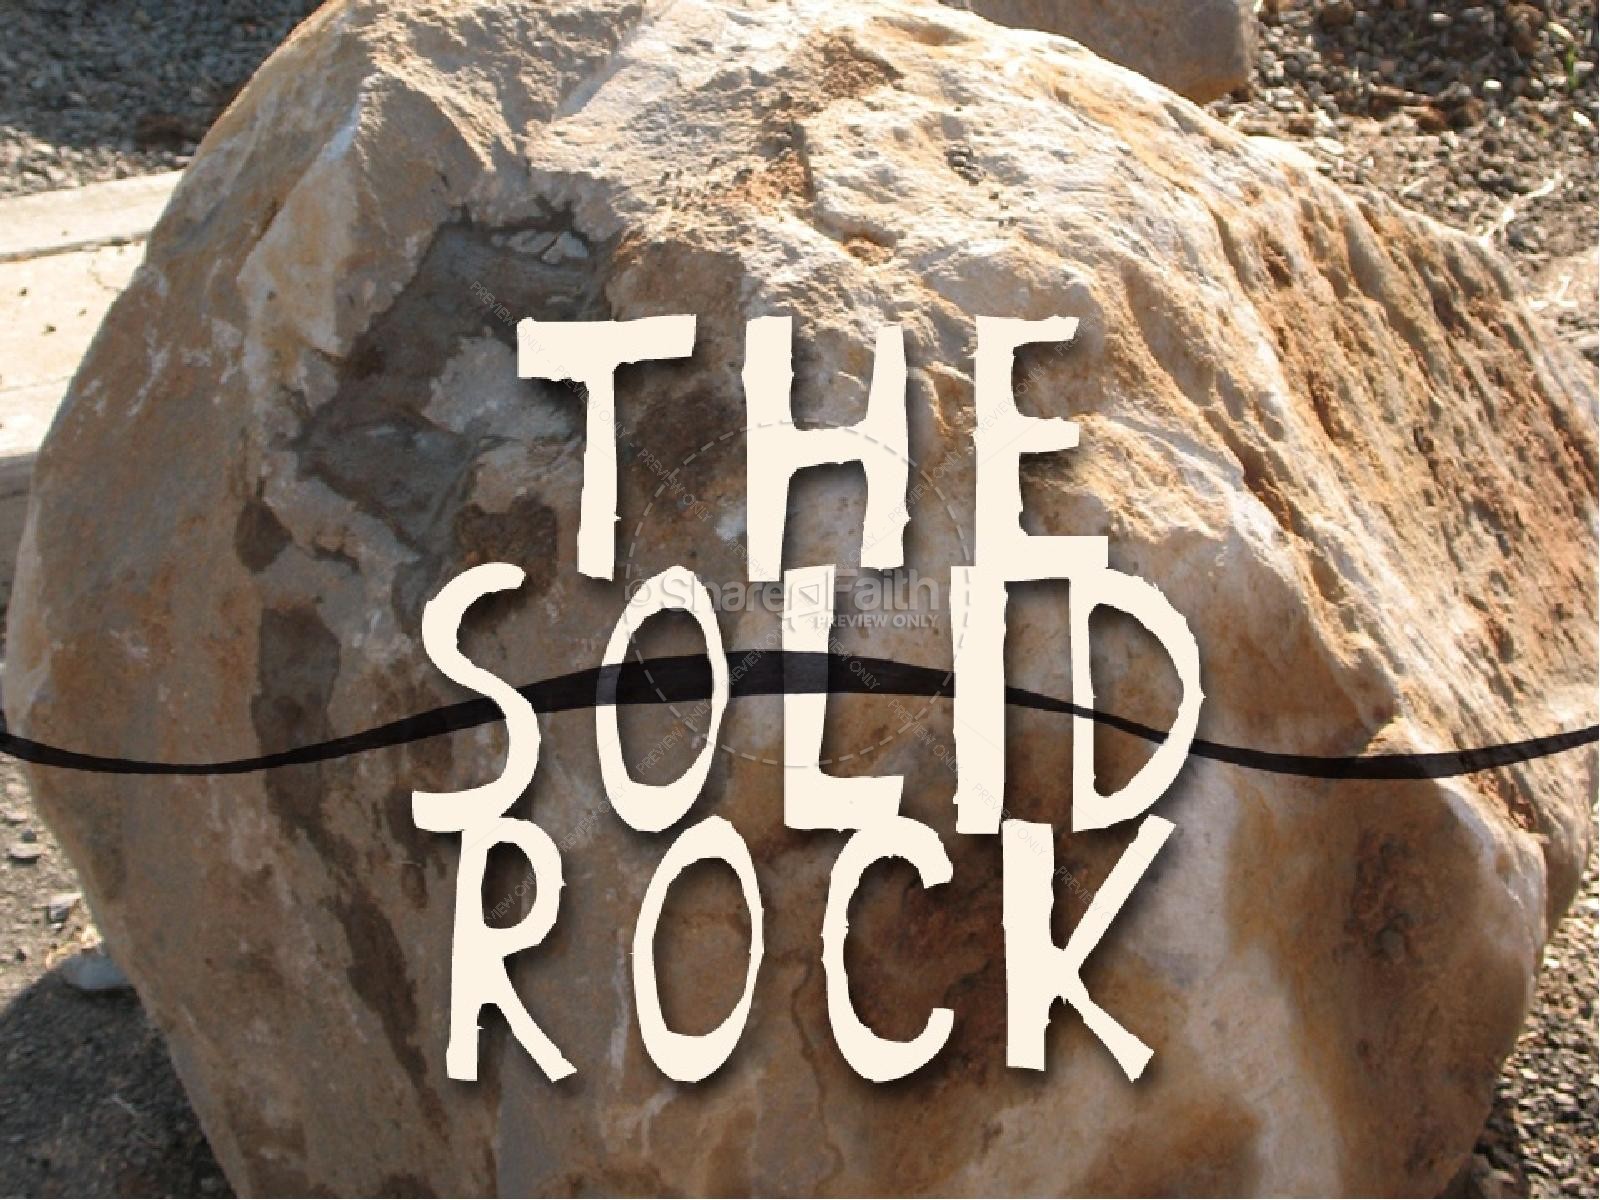 in christ alone solid rock